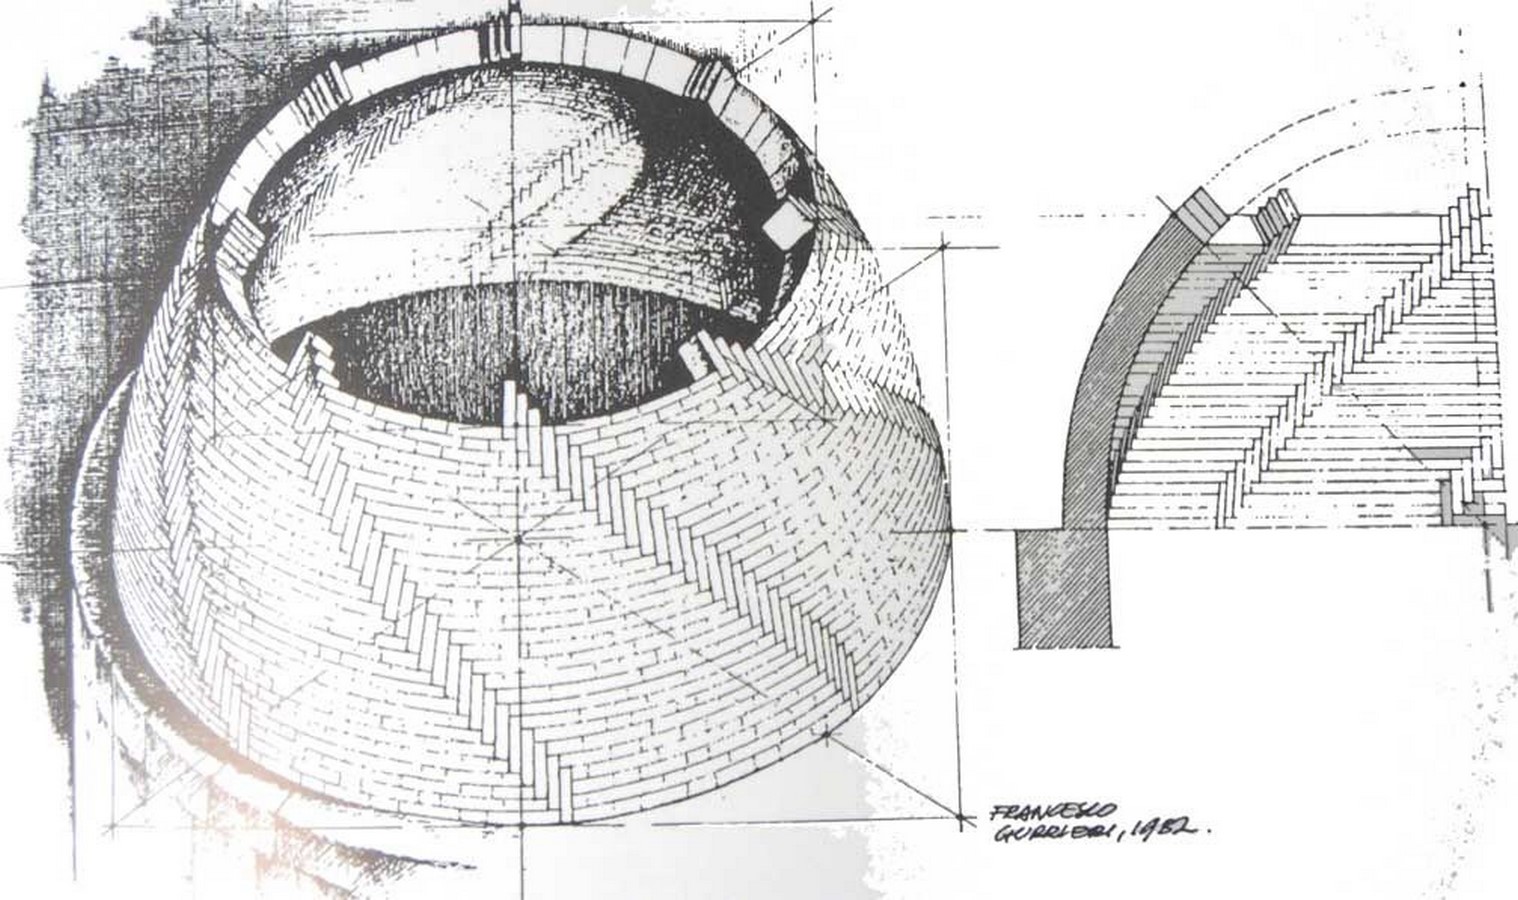 10 Reasons to love The Brunelleschi's dome - Sheet3